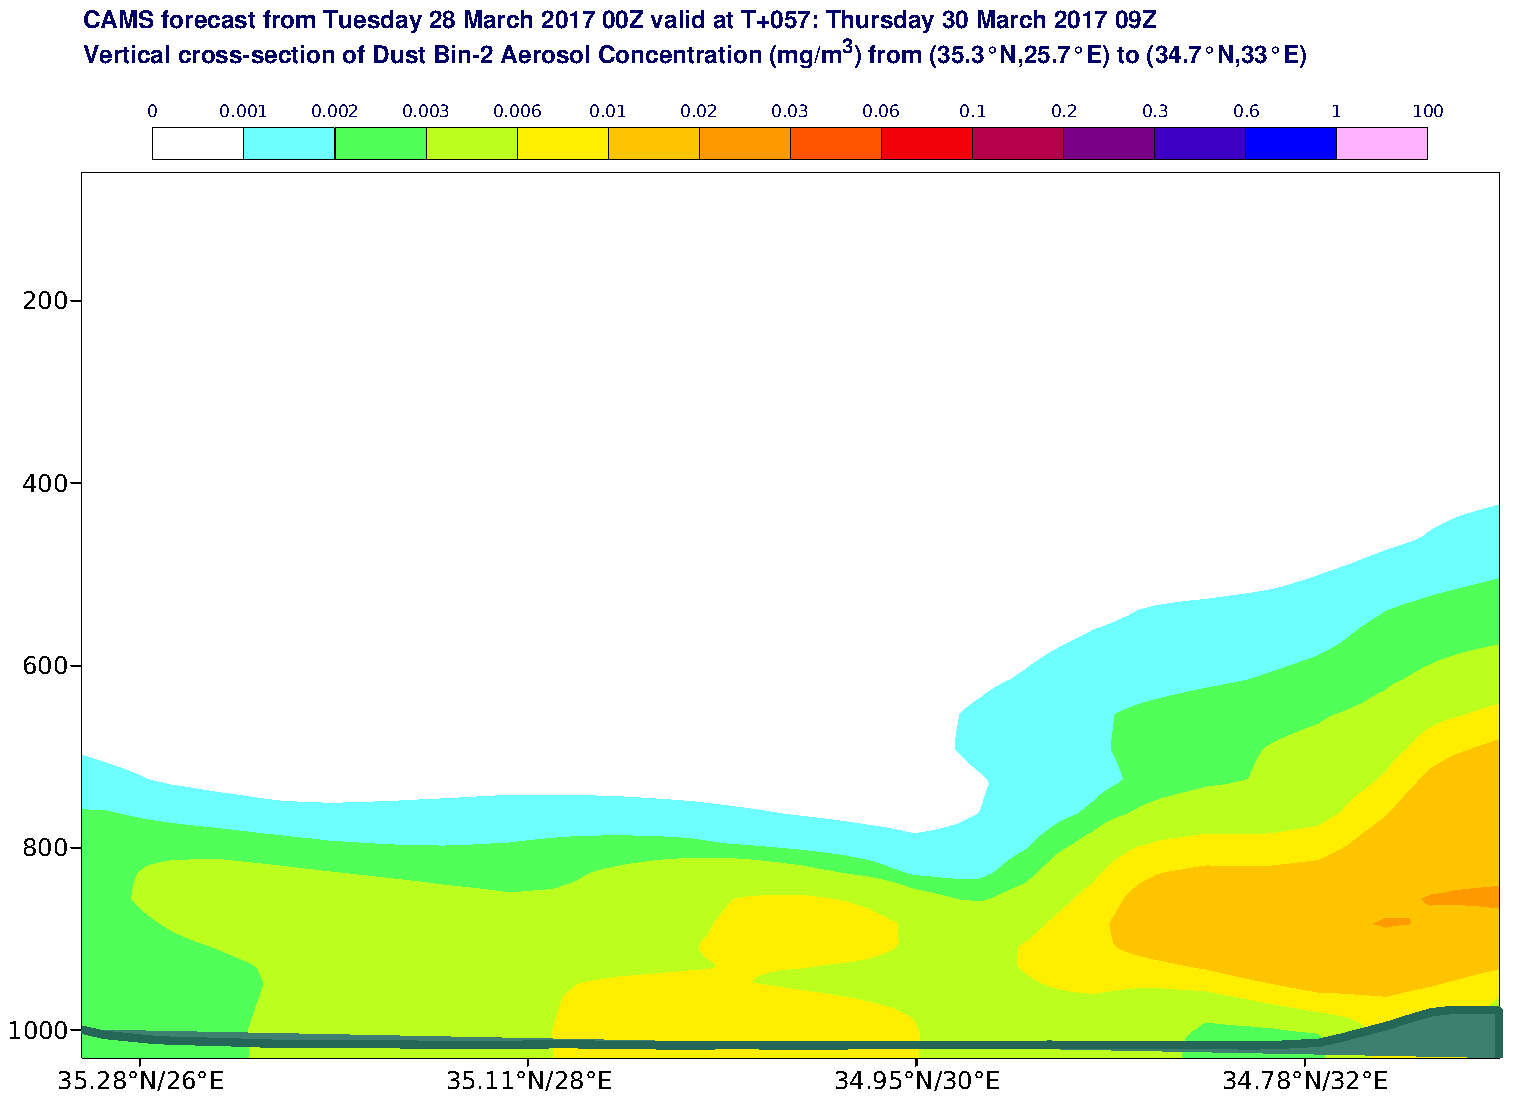 Vertical cross-section of Dust Bin-2 Aerosol Concentration (mg/m3) valid at T57 - 2017-03-30 09:00